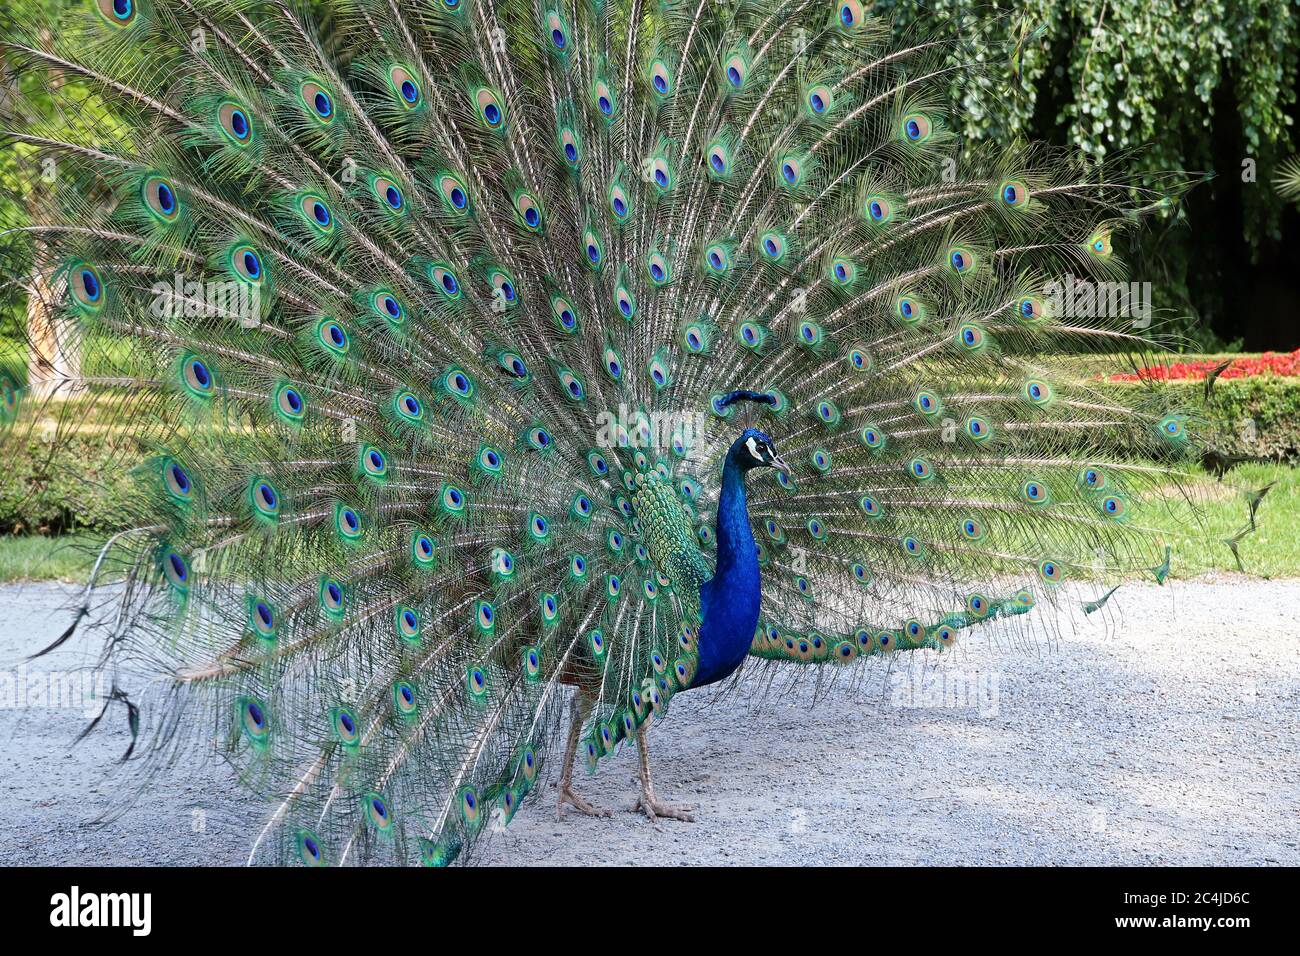 Proud peacock showing its long tail with beautiful feathers with eye-like markings Stock Photo